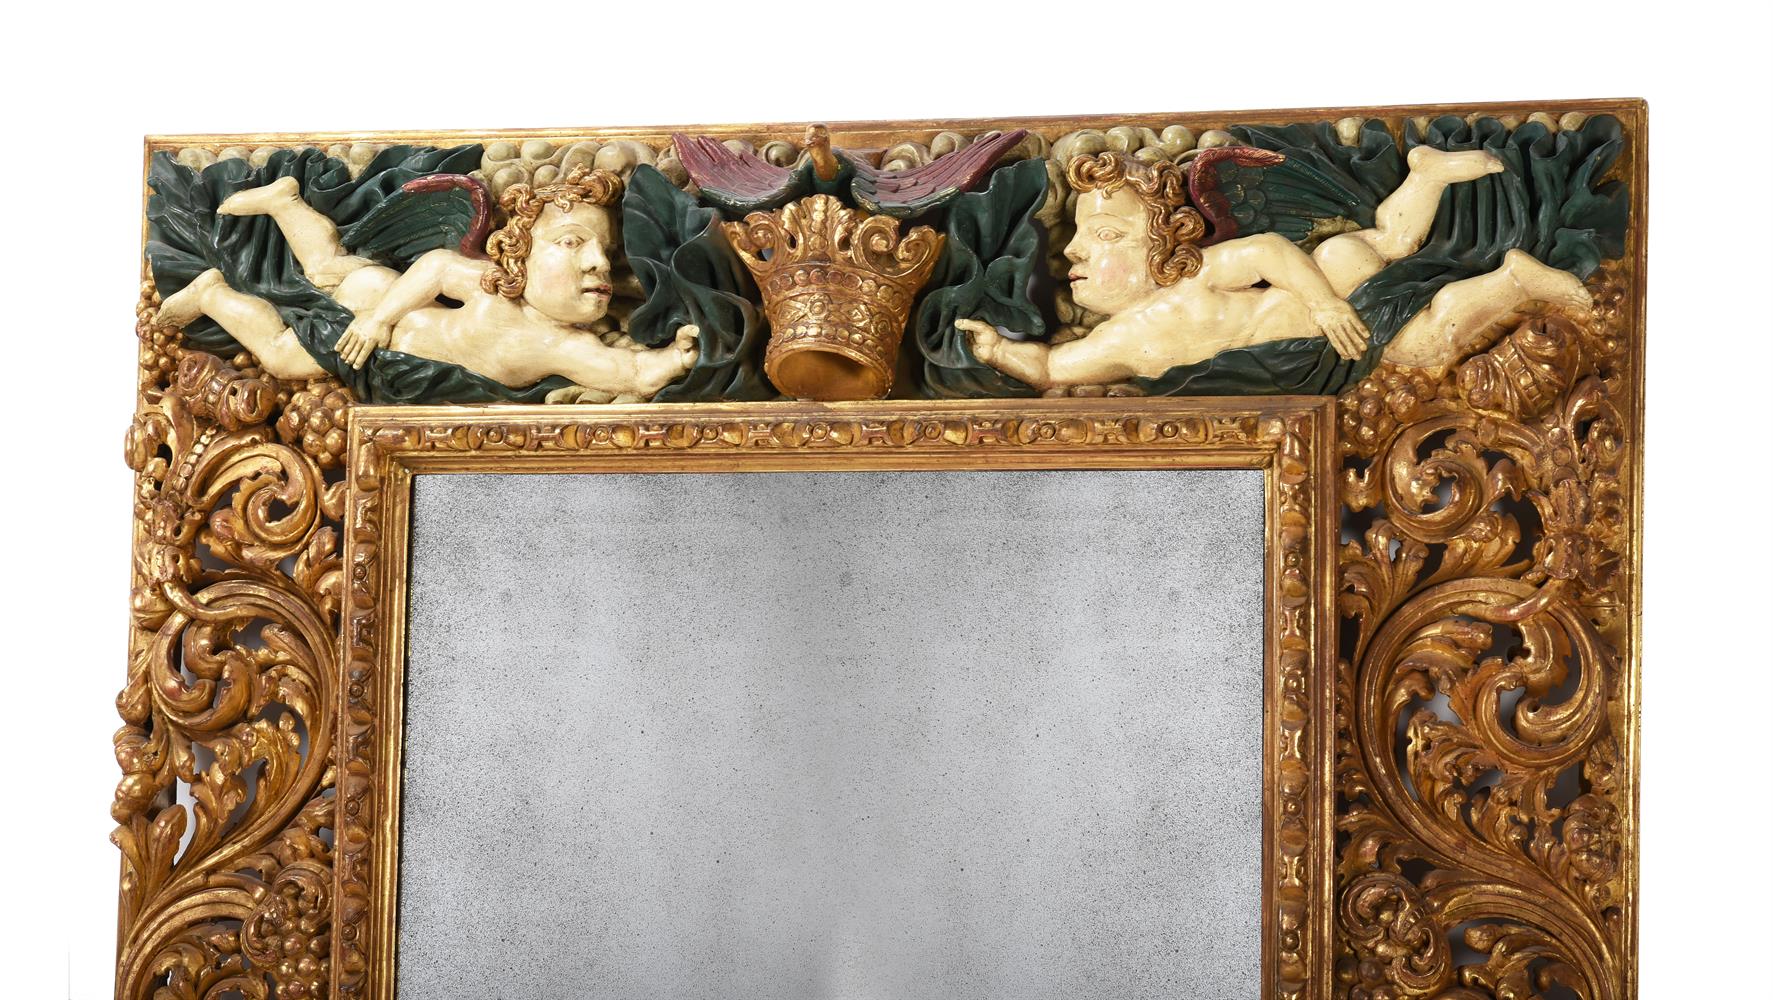 A CONTINENTAL CARVED GILTWOOD AND PAINTED MIRROR, SOUTH GERMAN OR AUSTRIAN, 17TH CENTURY AND LATER - Image 2 of 6